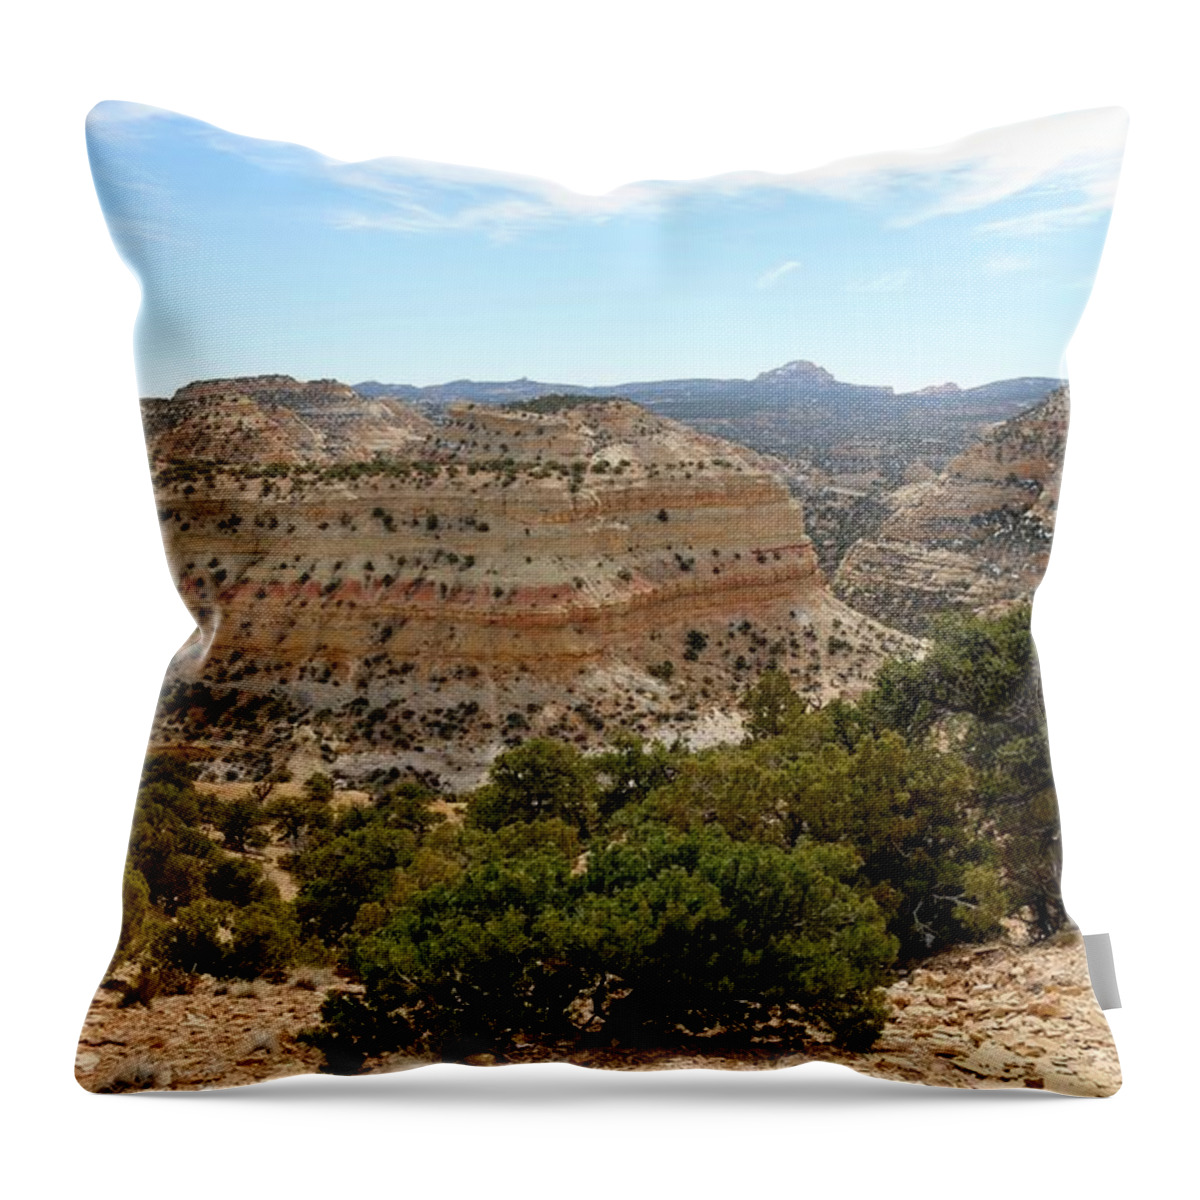 Utah Throw Pillow featuring the photograph Across Utah by Christy Pooschke